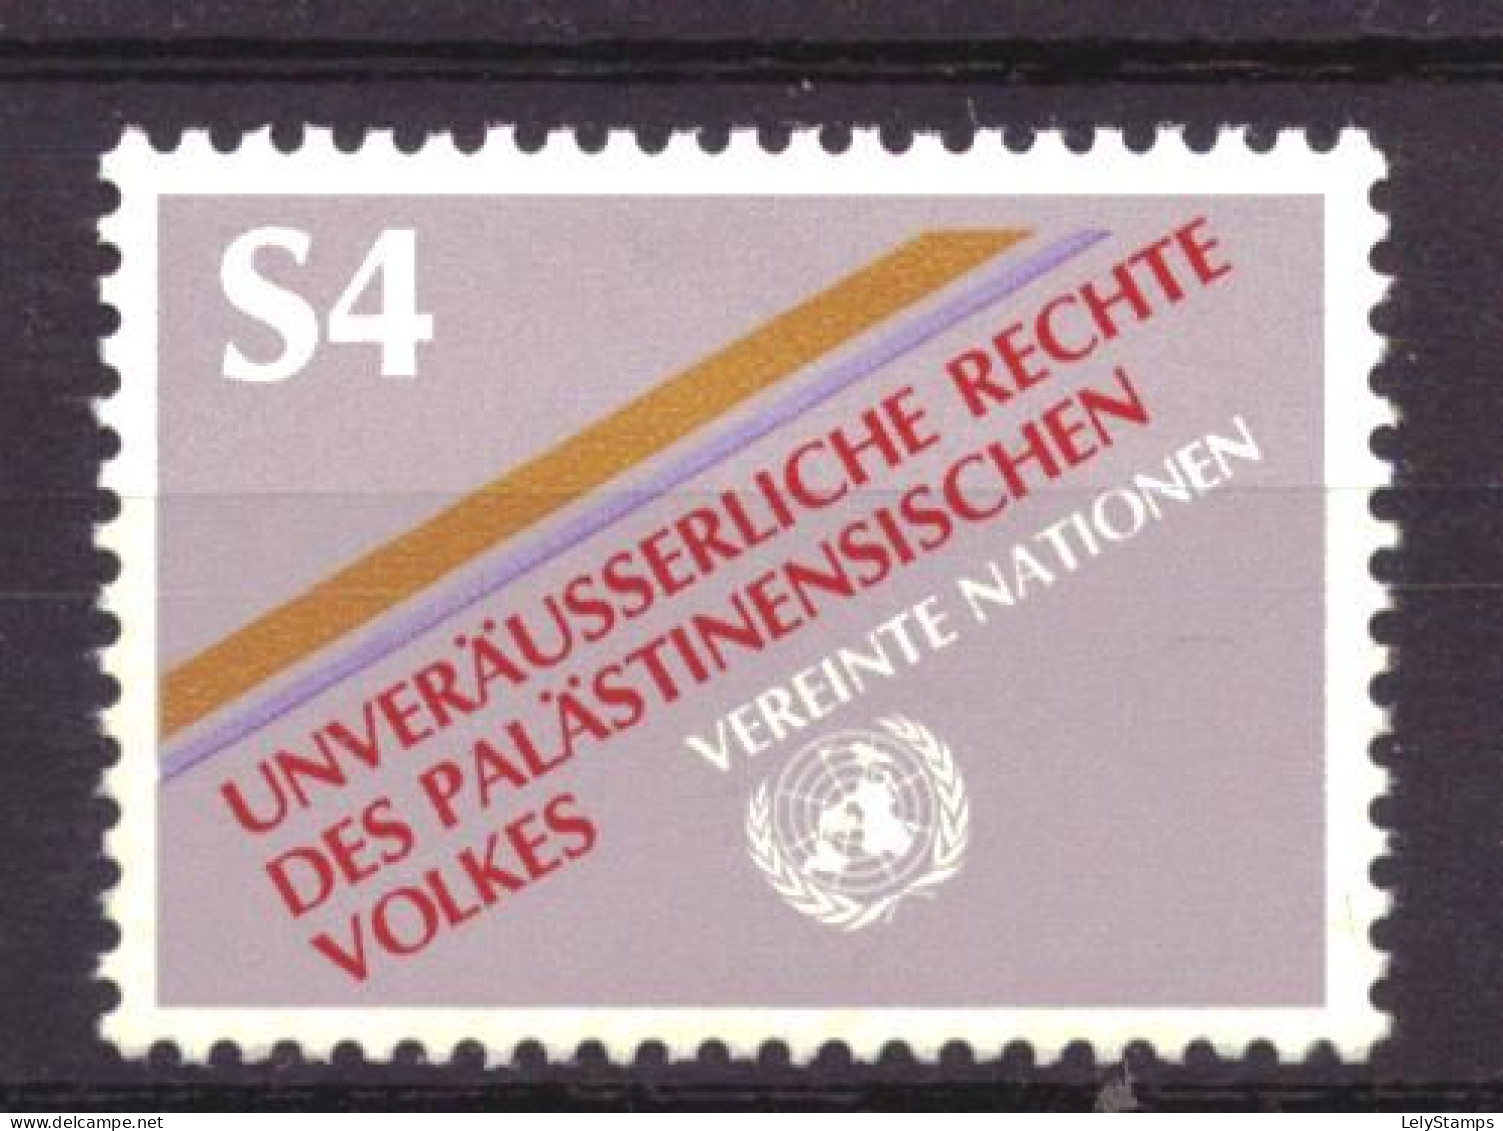 United Nations Vienna 16 MNH ** (1981) - Used Stamps